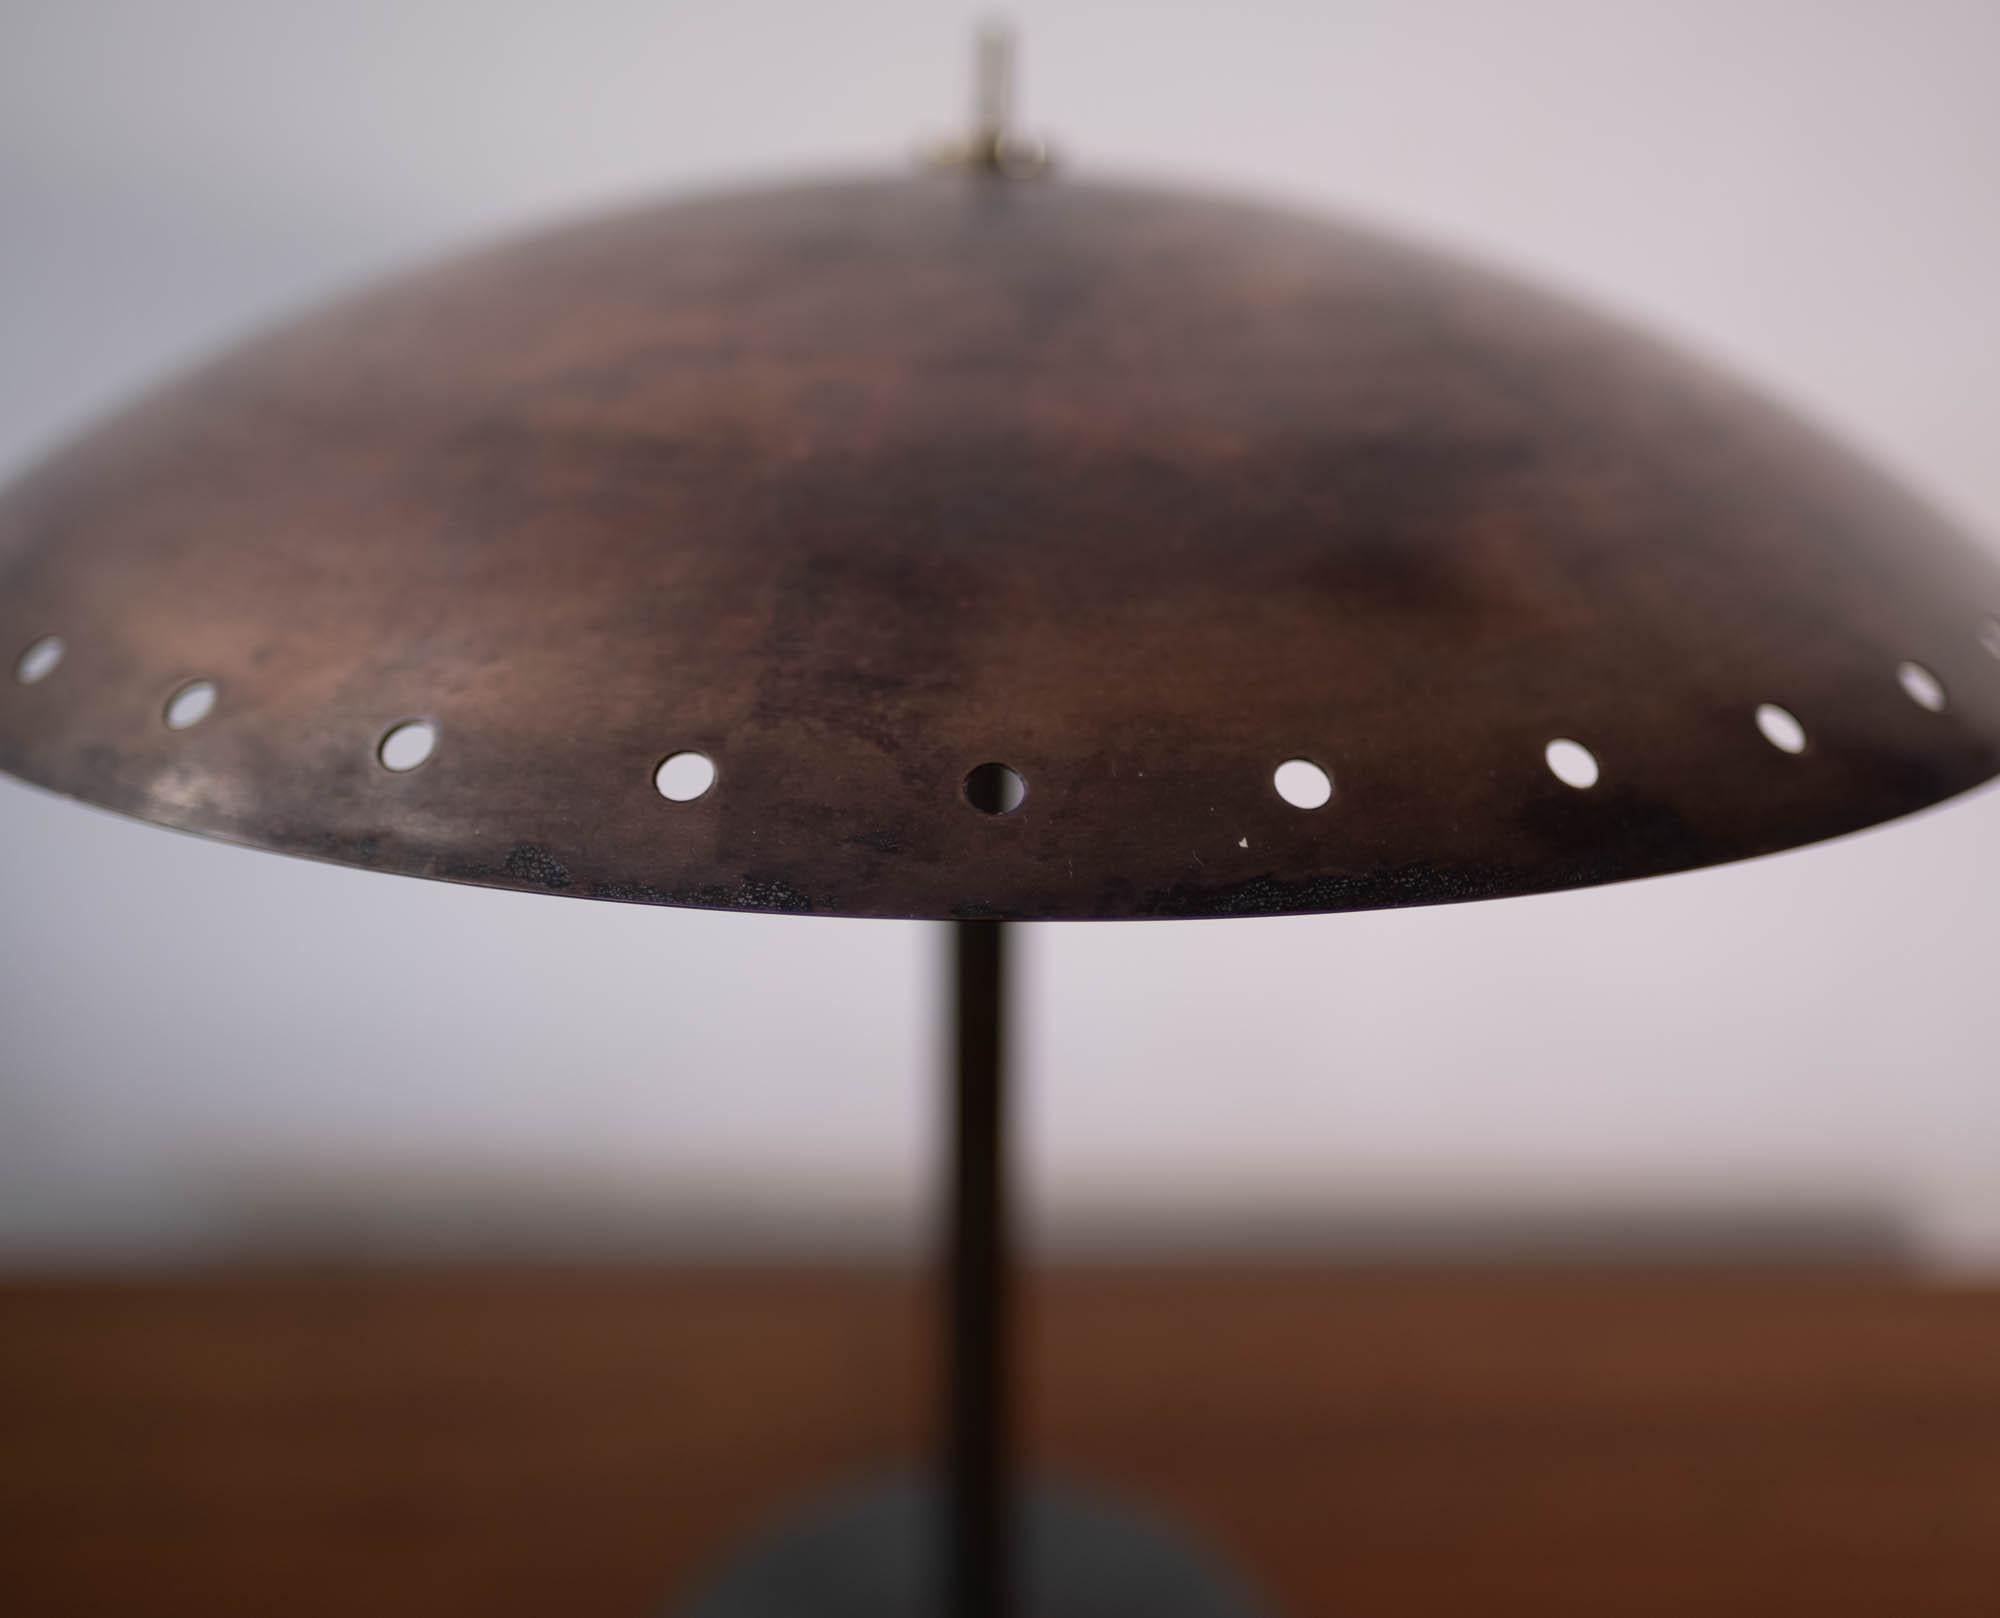 Birger Dahl Sonnico Brass Table Lamp, Norway, 1950s 1